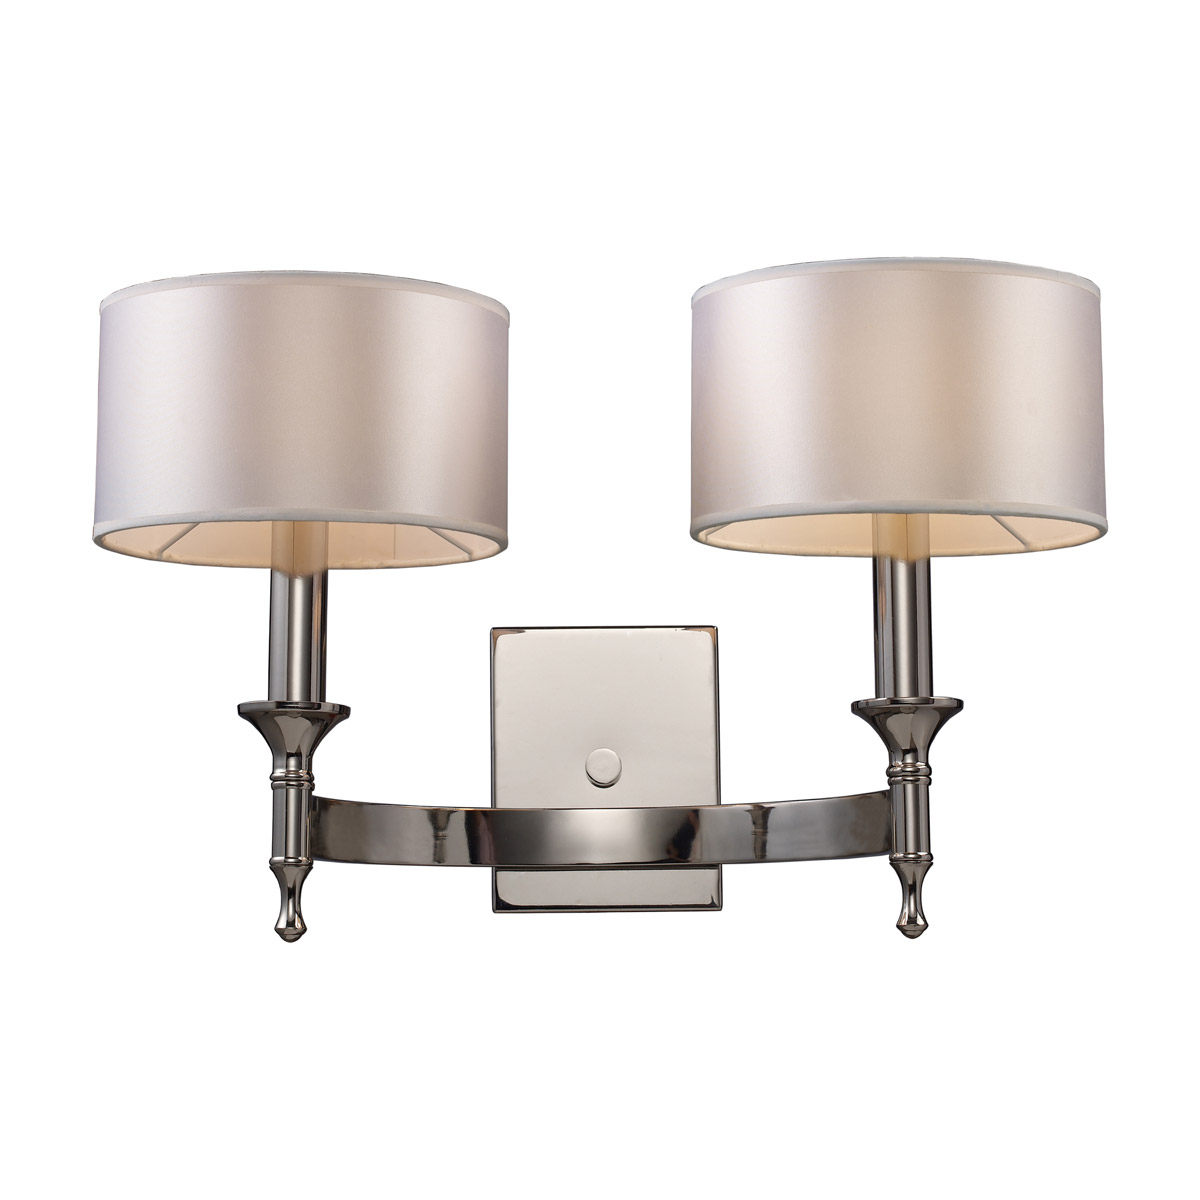 ELK Lighting, Candle Sconces for Walls, Brooklyn, Accentuations Brand, Furniture by ABD    